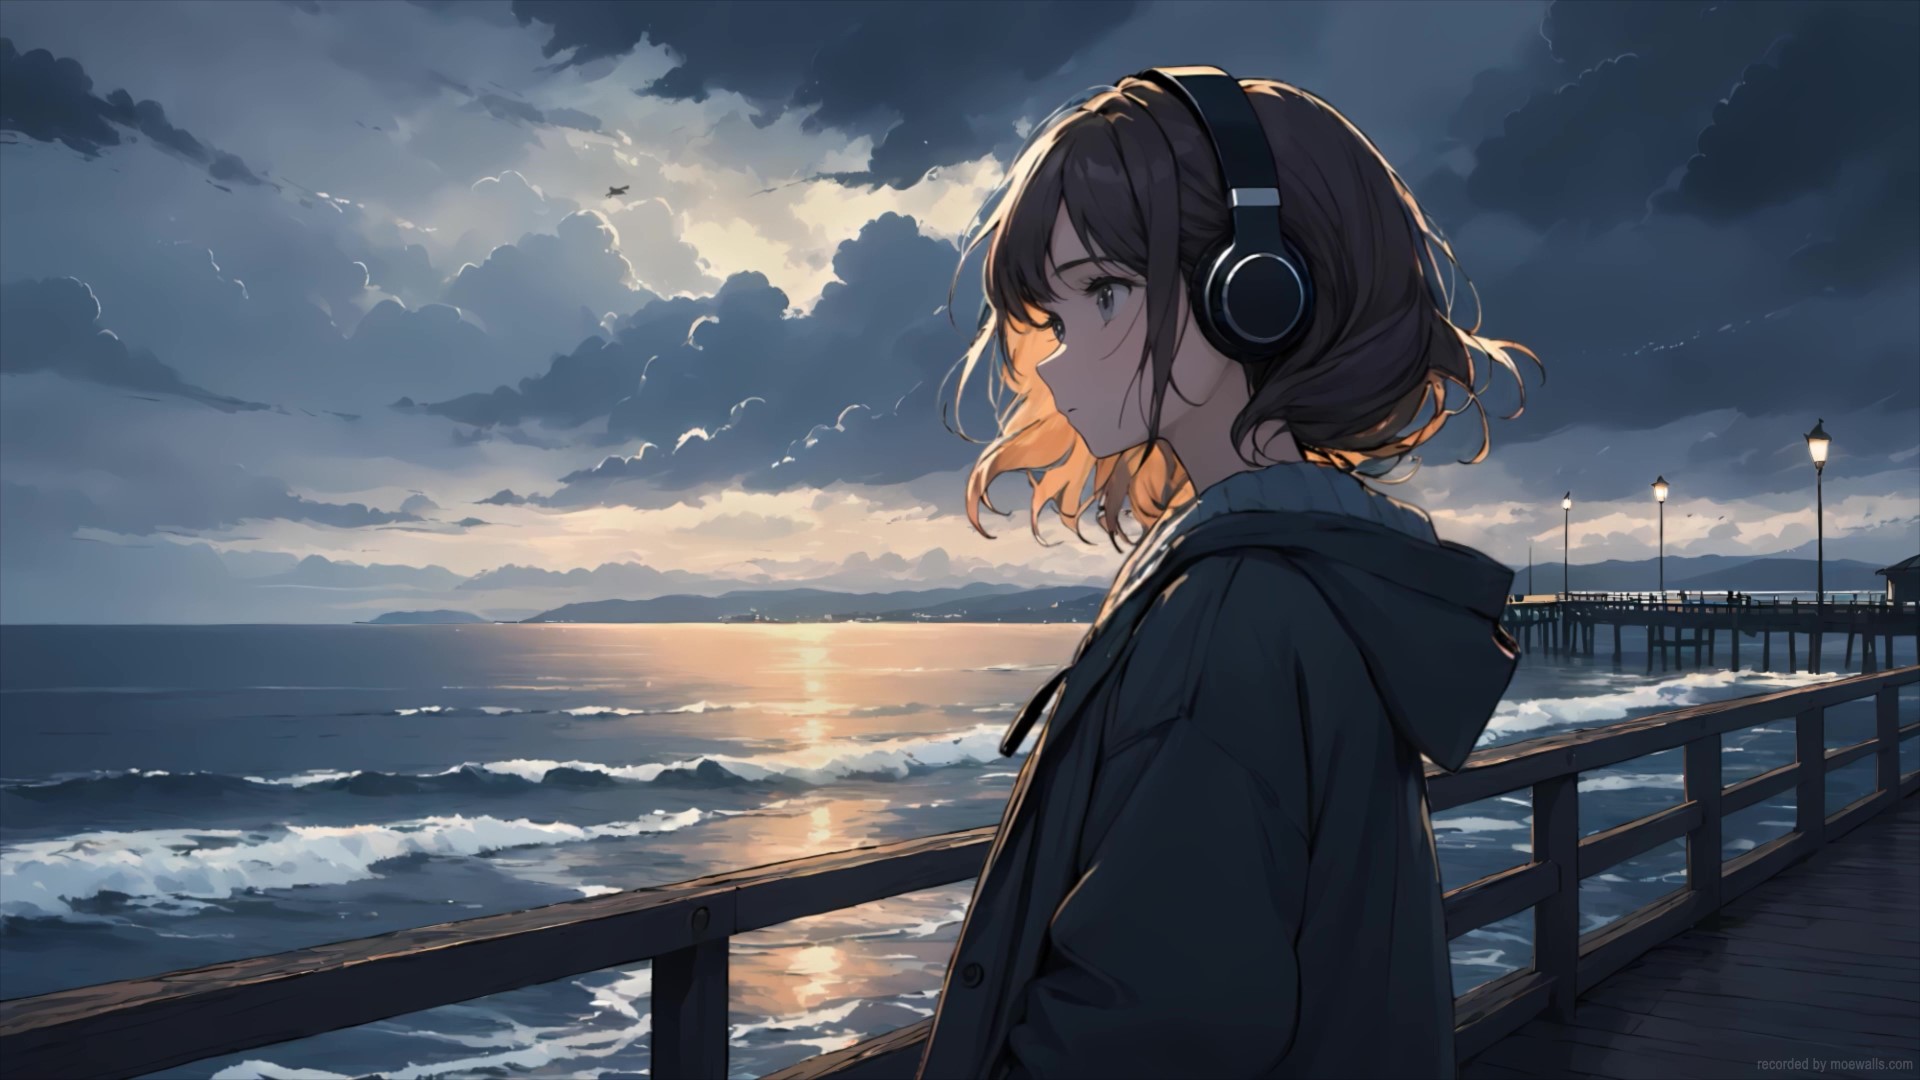 Live wallpaper Lonely anime girl, stream / download to desktop